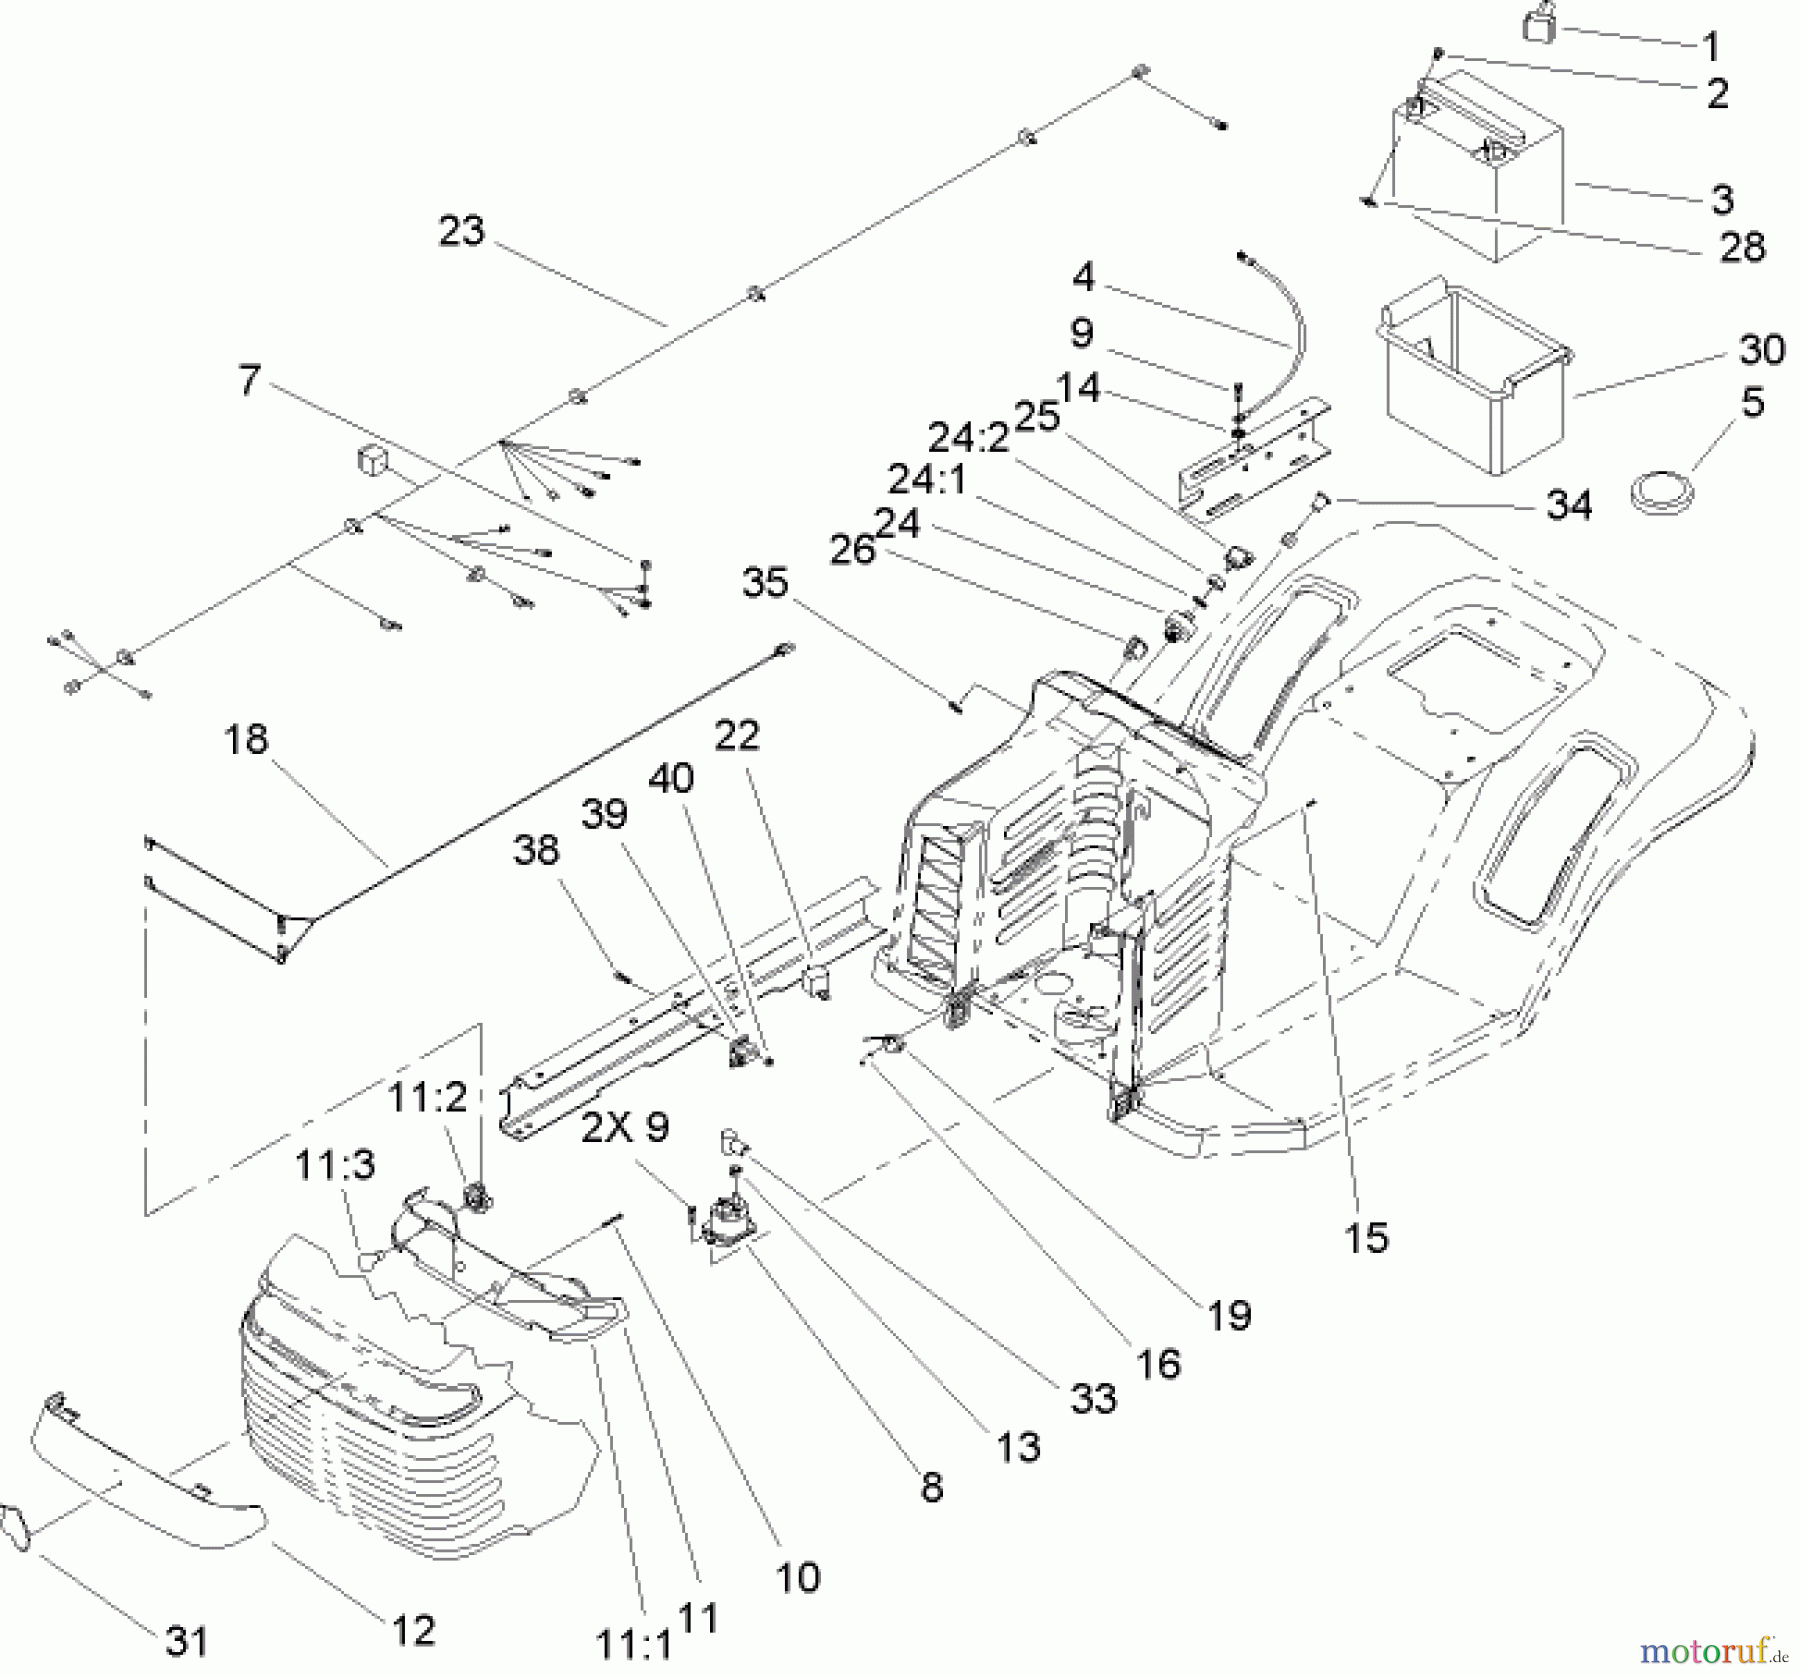  Toro Neu Mowers, Lawn & Garden Tractor Seite 1 71227 (16-38HXL) - Toro 16-38HXL Lawn Tractor, 2004 (240000001-240999999) ELECTRICAL COMPONENT ASSEMBLY